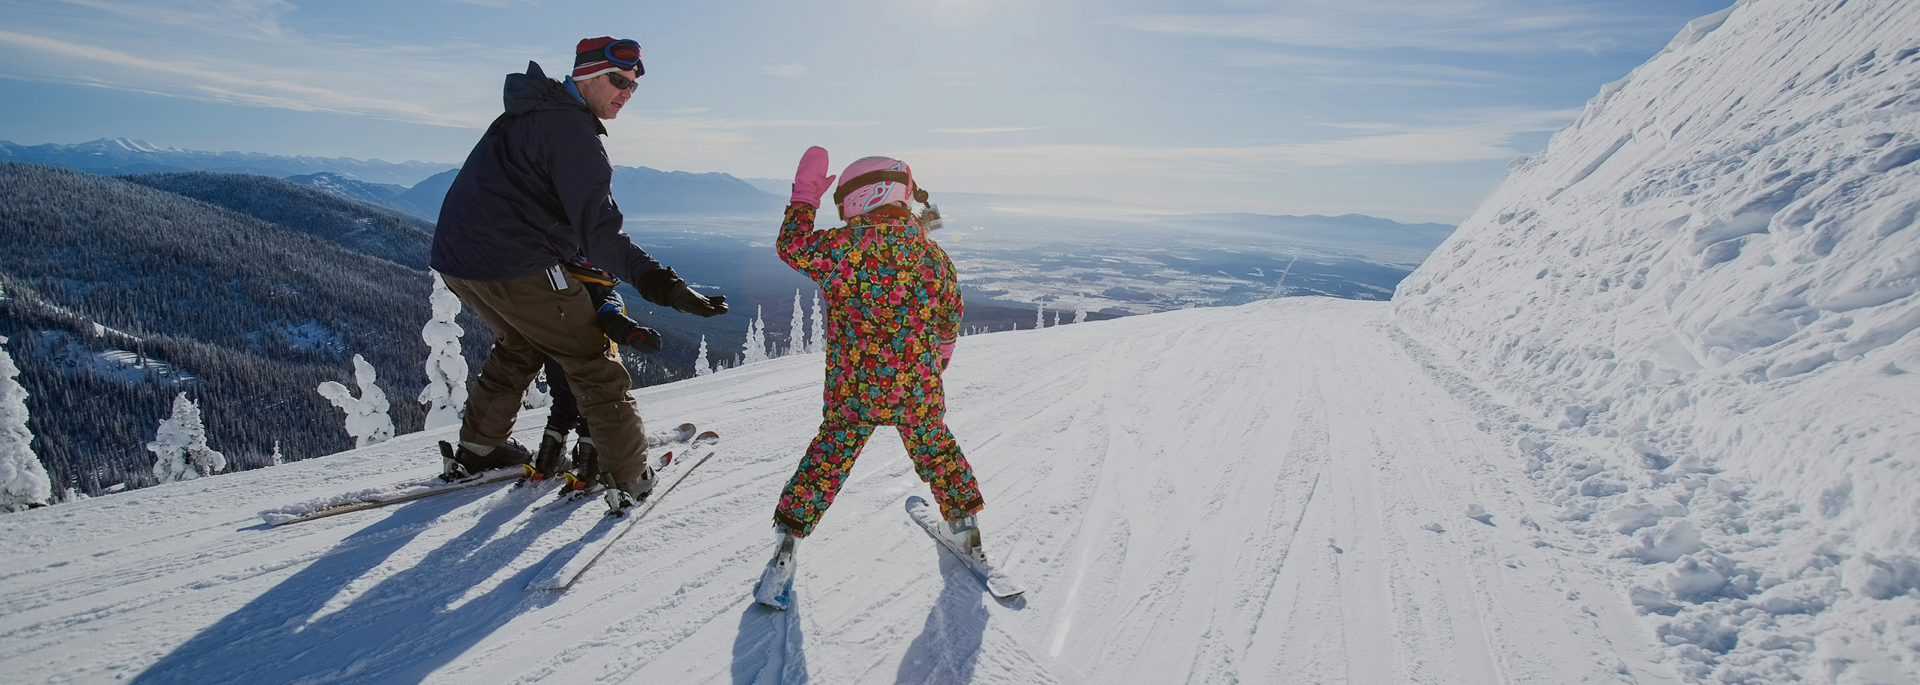 father and child high-fiving on skis